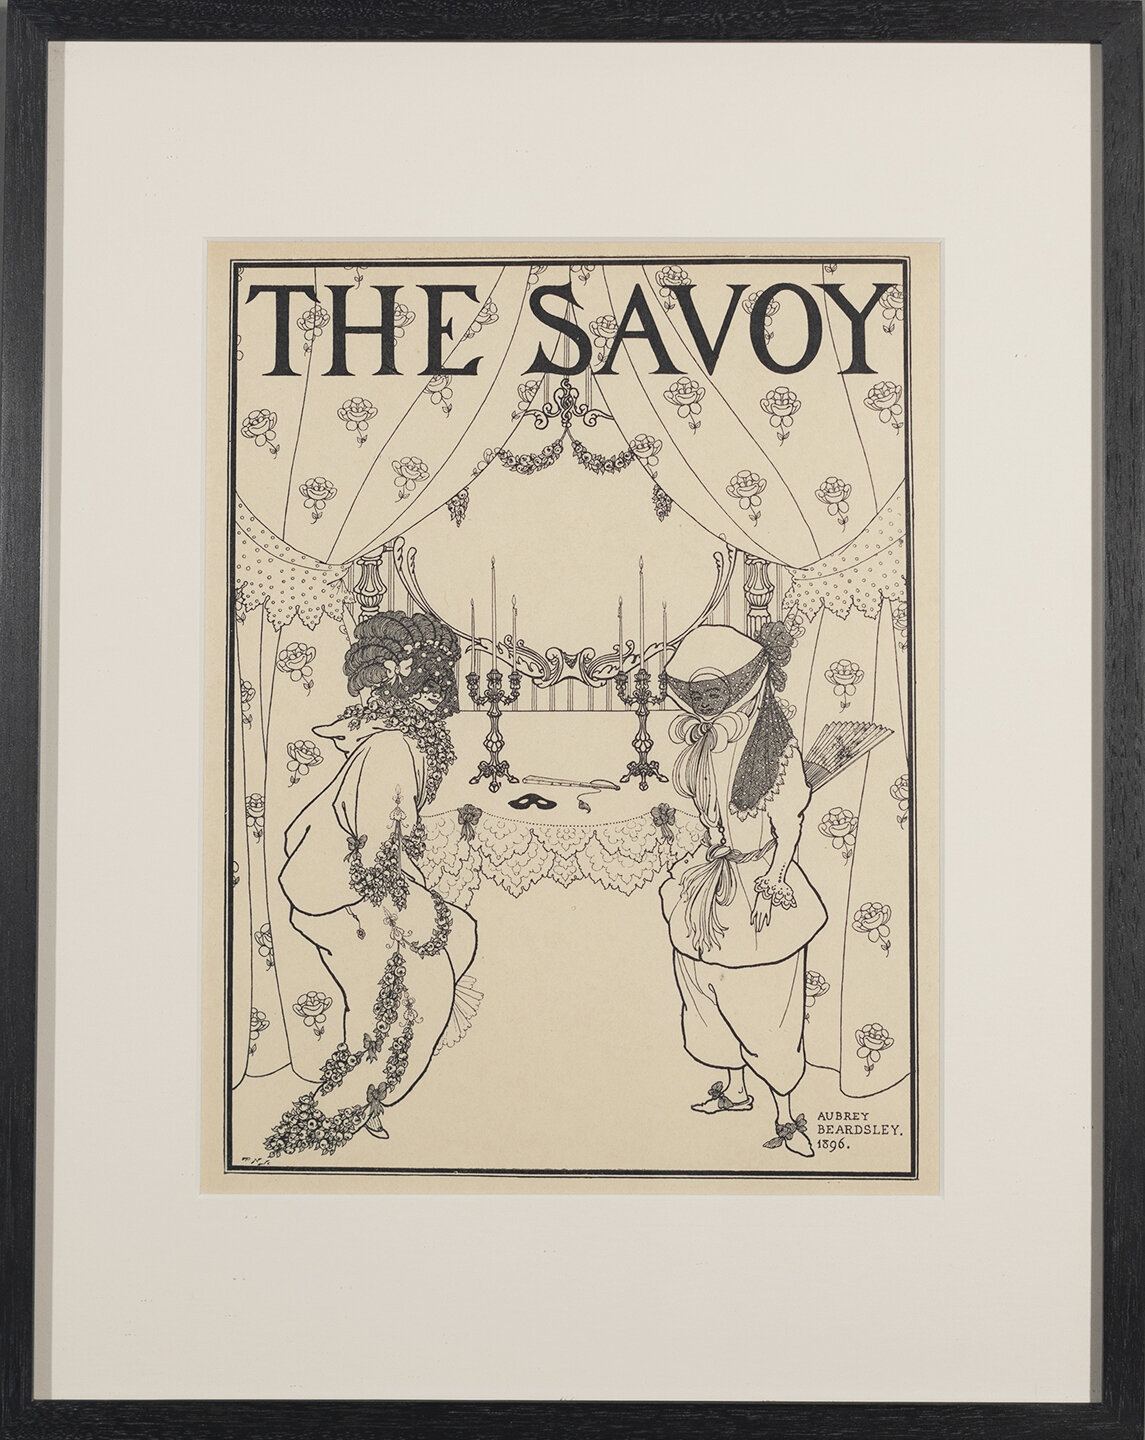 Aubrey Beardsley, title page design for No. 1 of "The Savoy." 